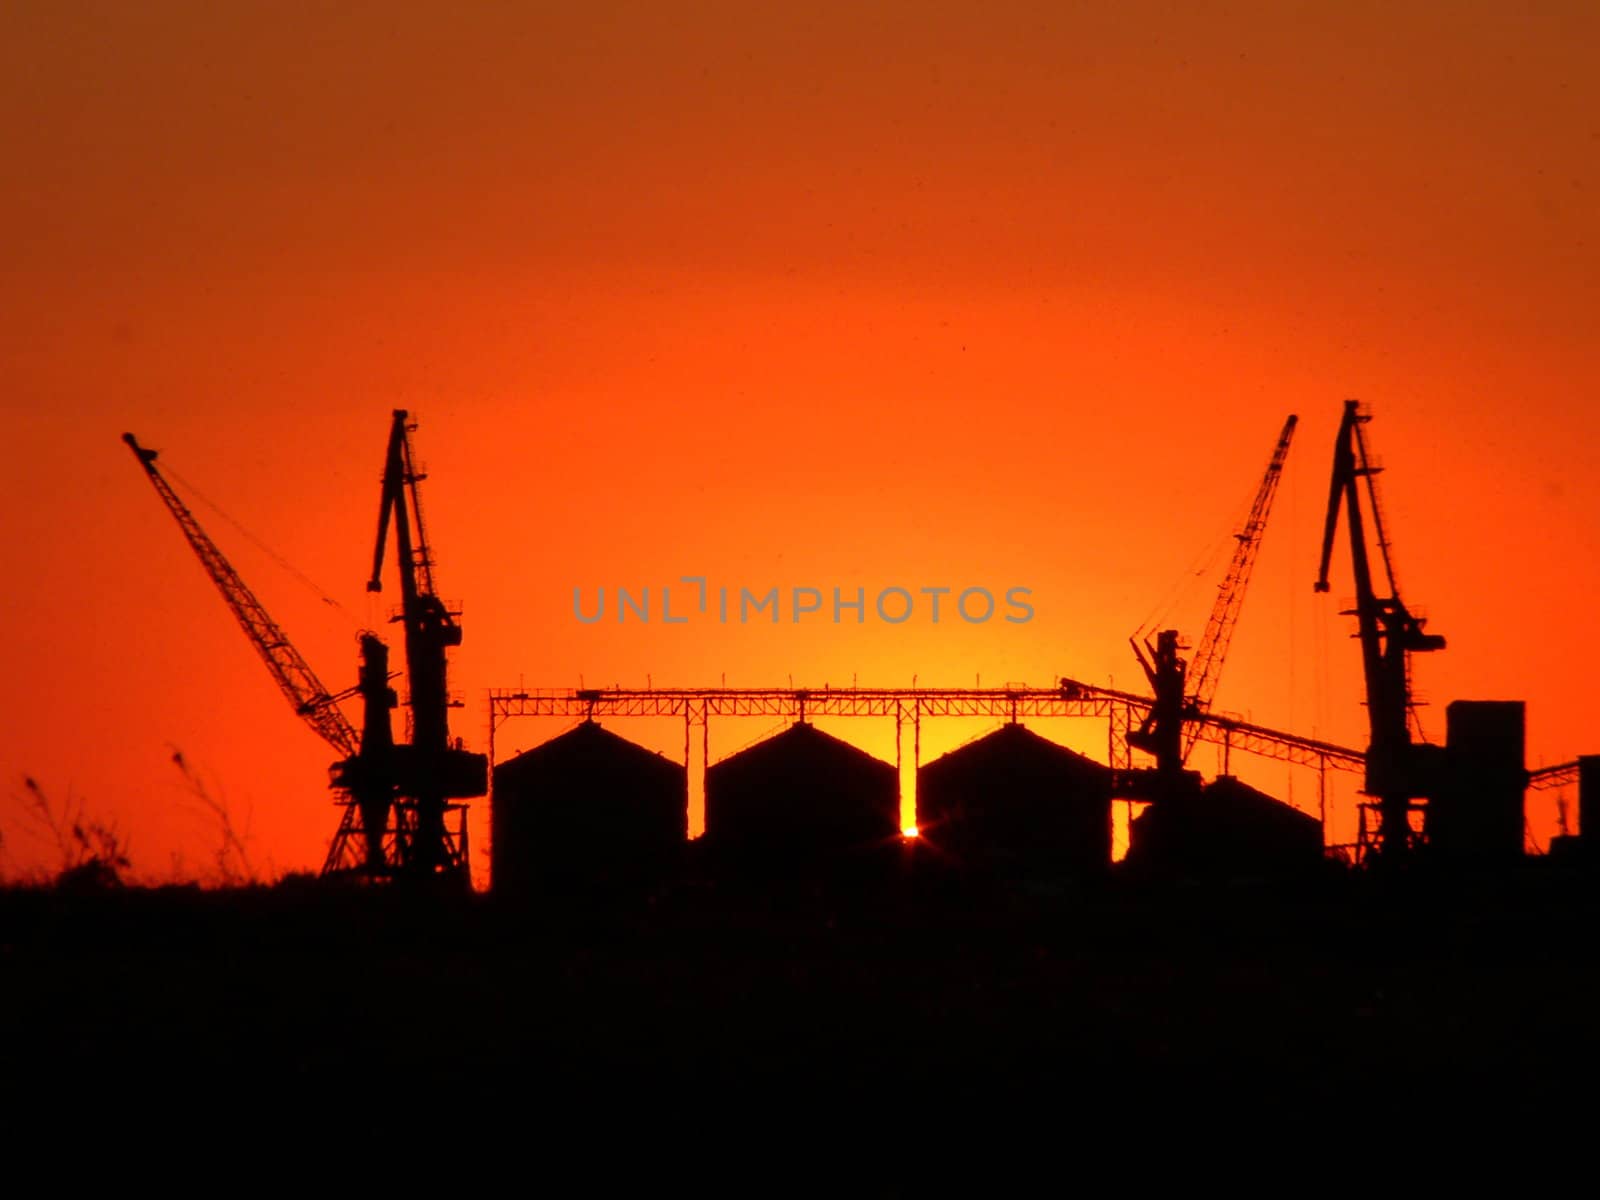 The Industrial landscape by ichip